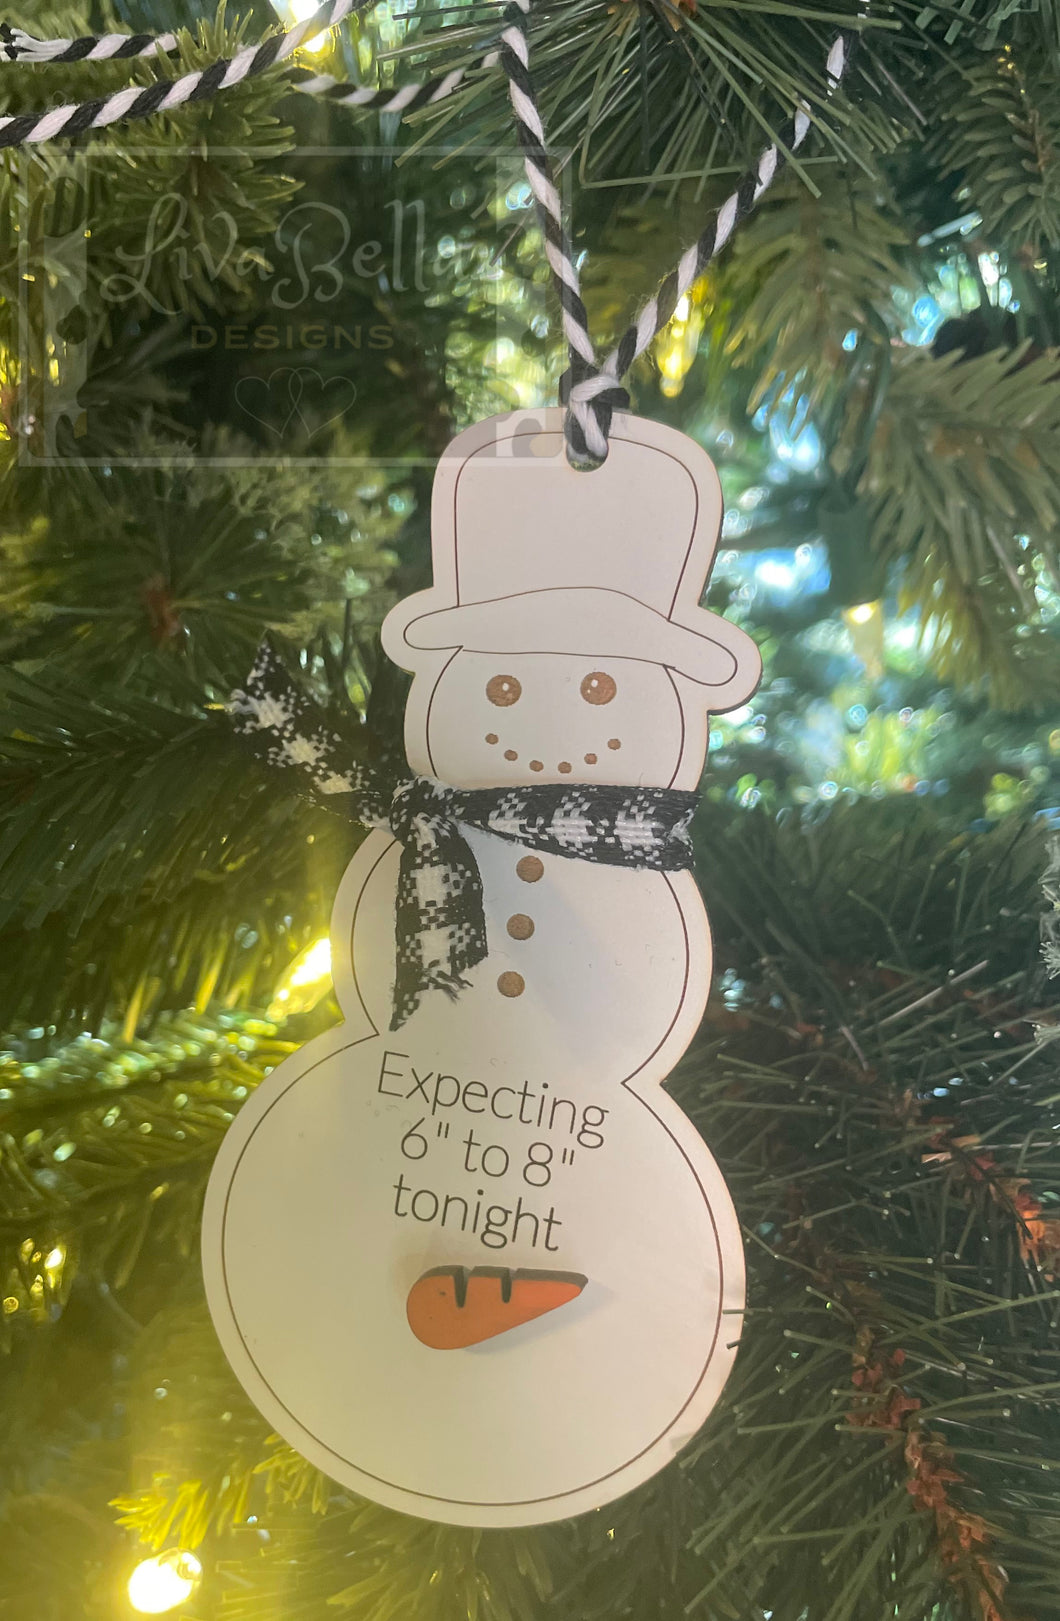 Naughty Snowman - Expecting 6”-8” tonight Snowman Carrot Funny Adult Ornament